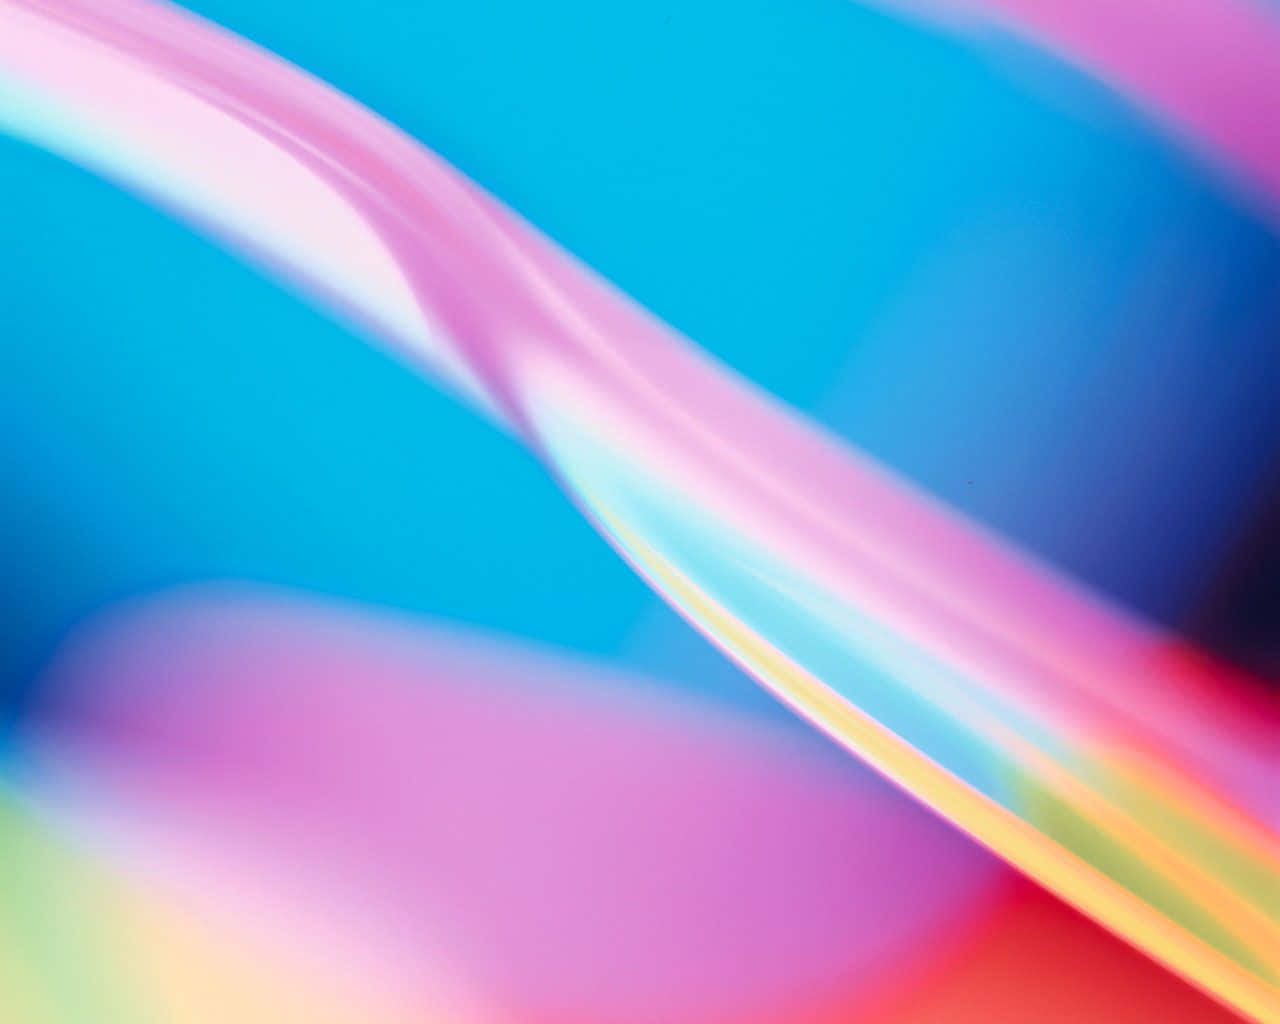 An abstract composition of vibrant colors and light